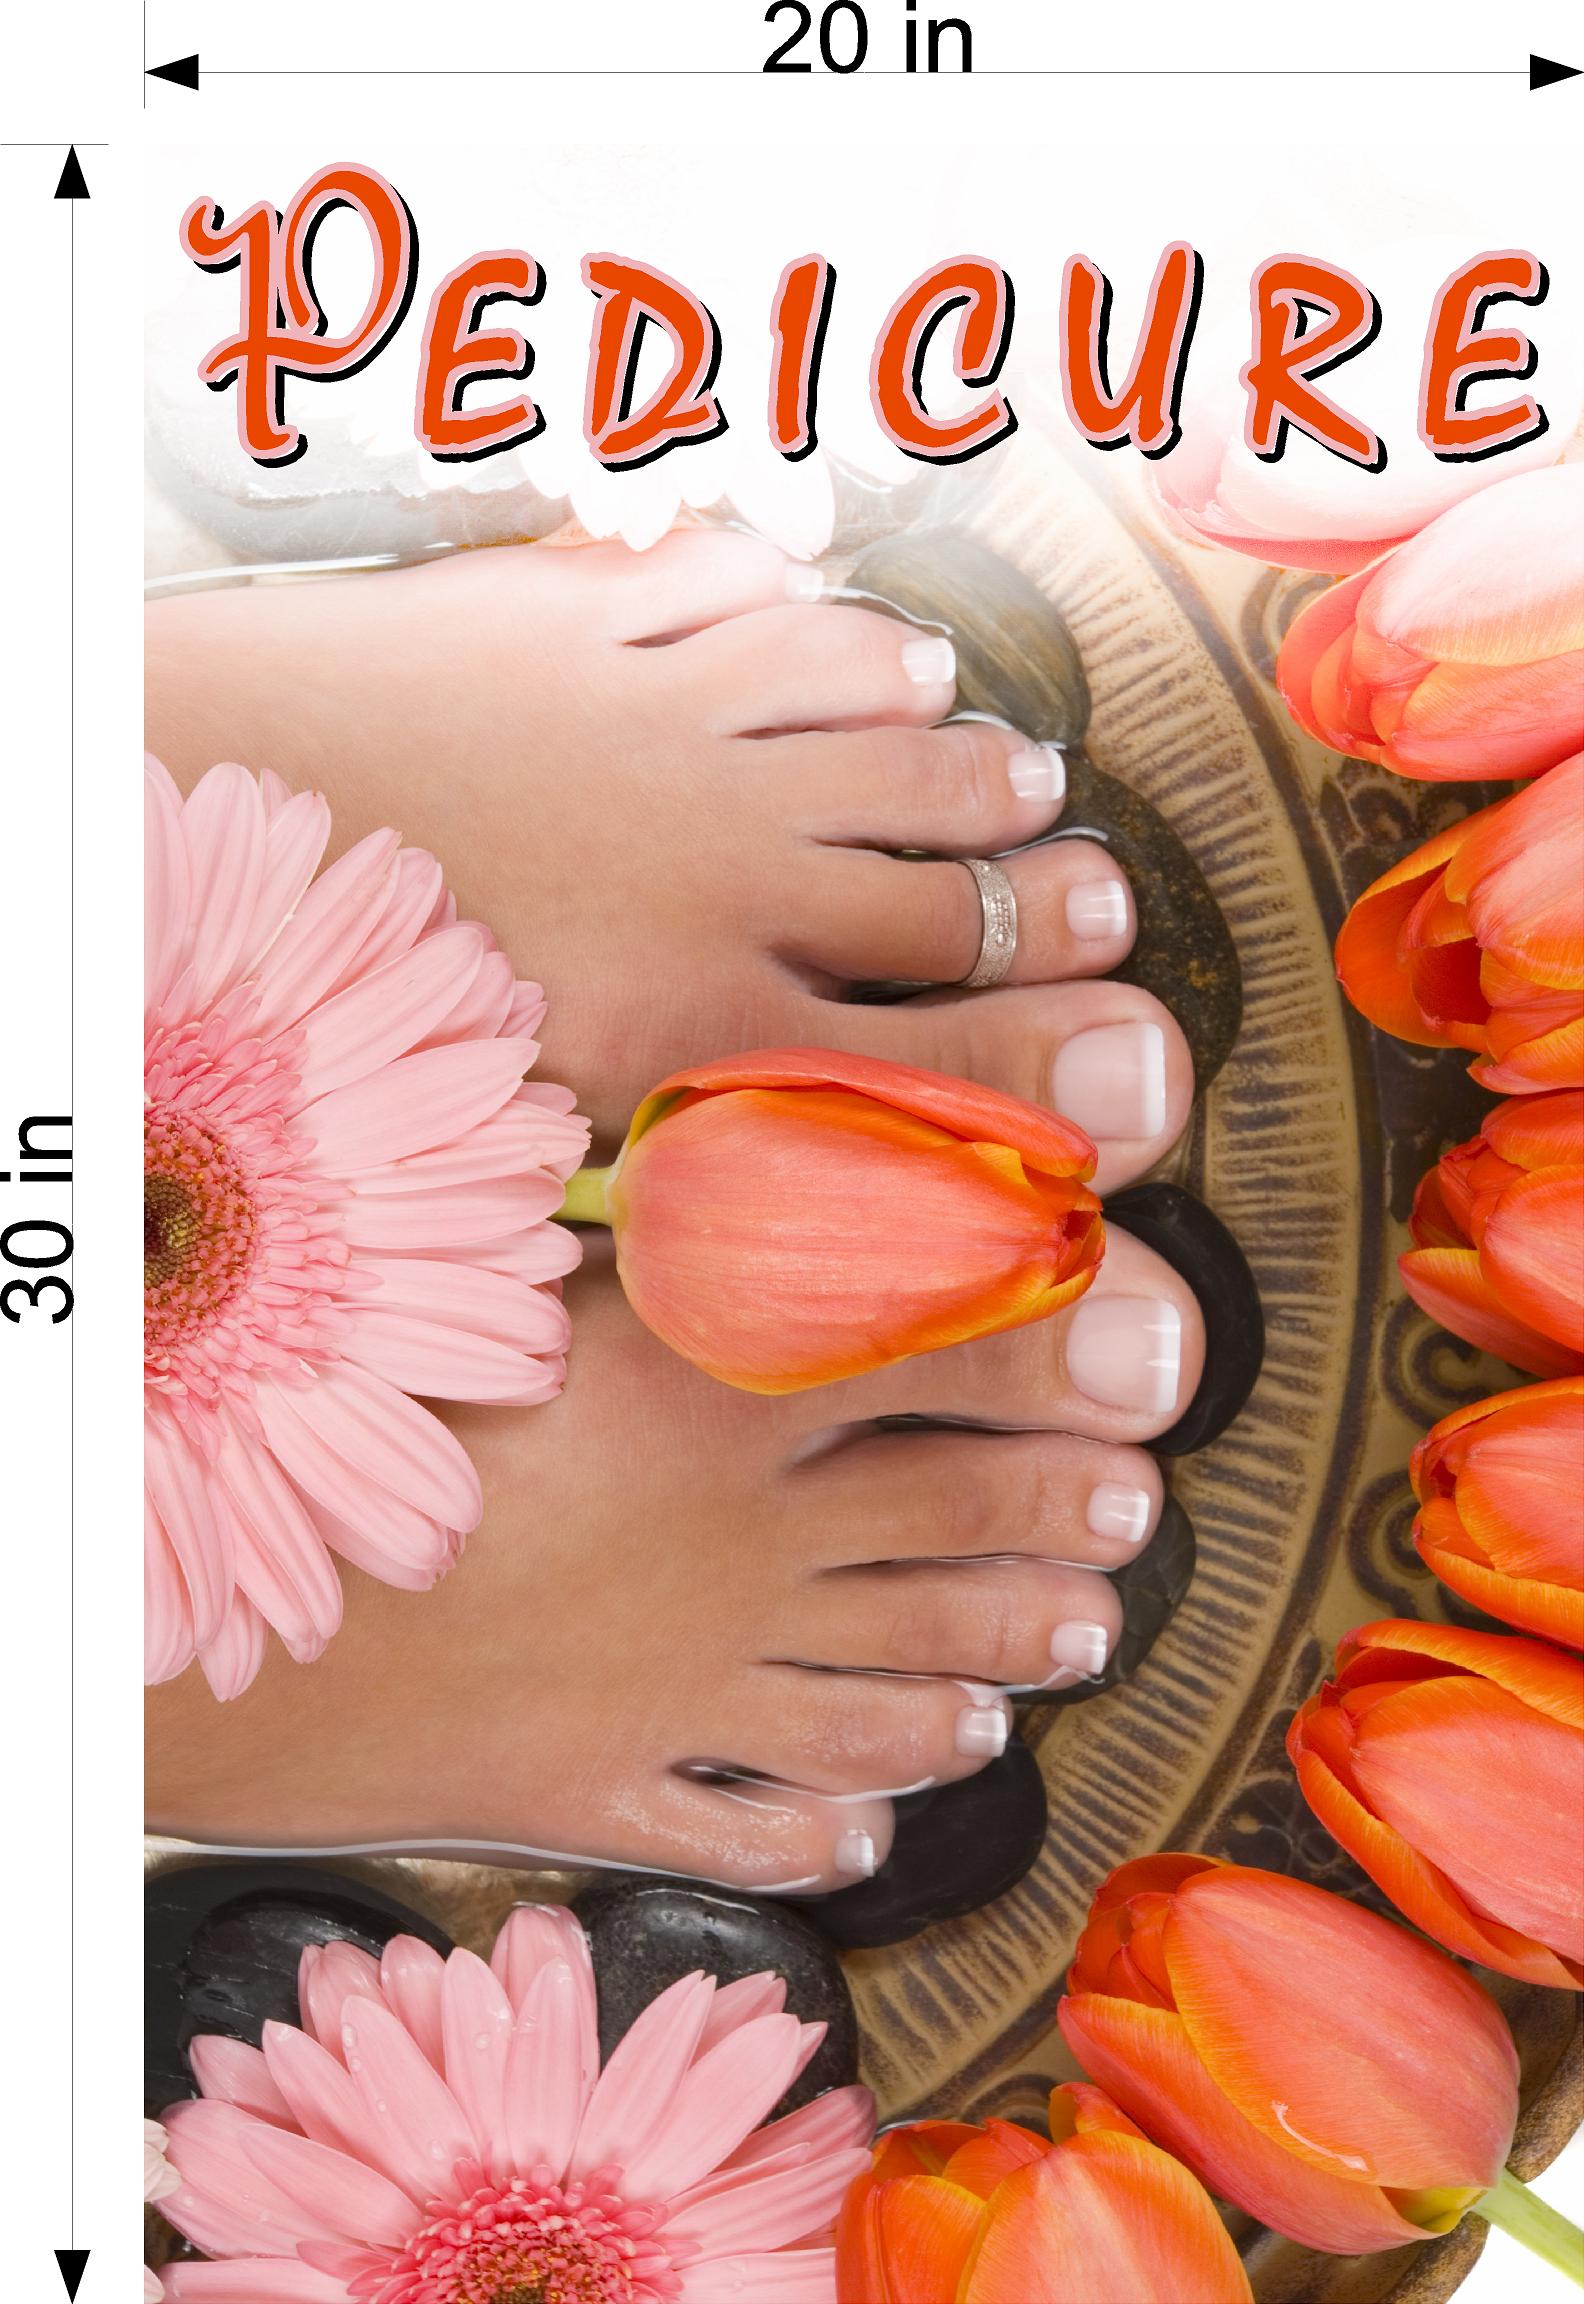 Pedicure 25 Wallpaper Fabric Poster Decal with Adhesive Backing Wall Sticker Decor Indoors Interior Sign Vertical